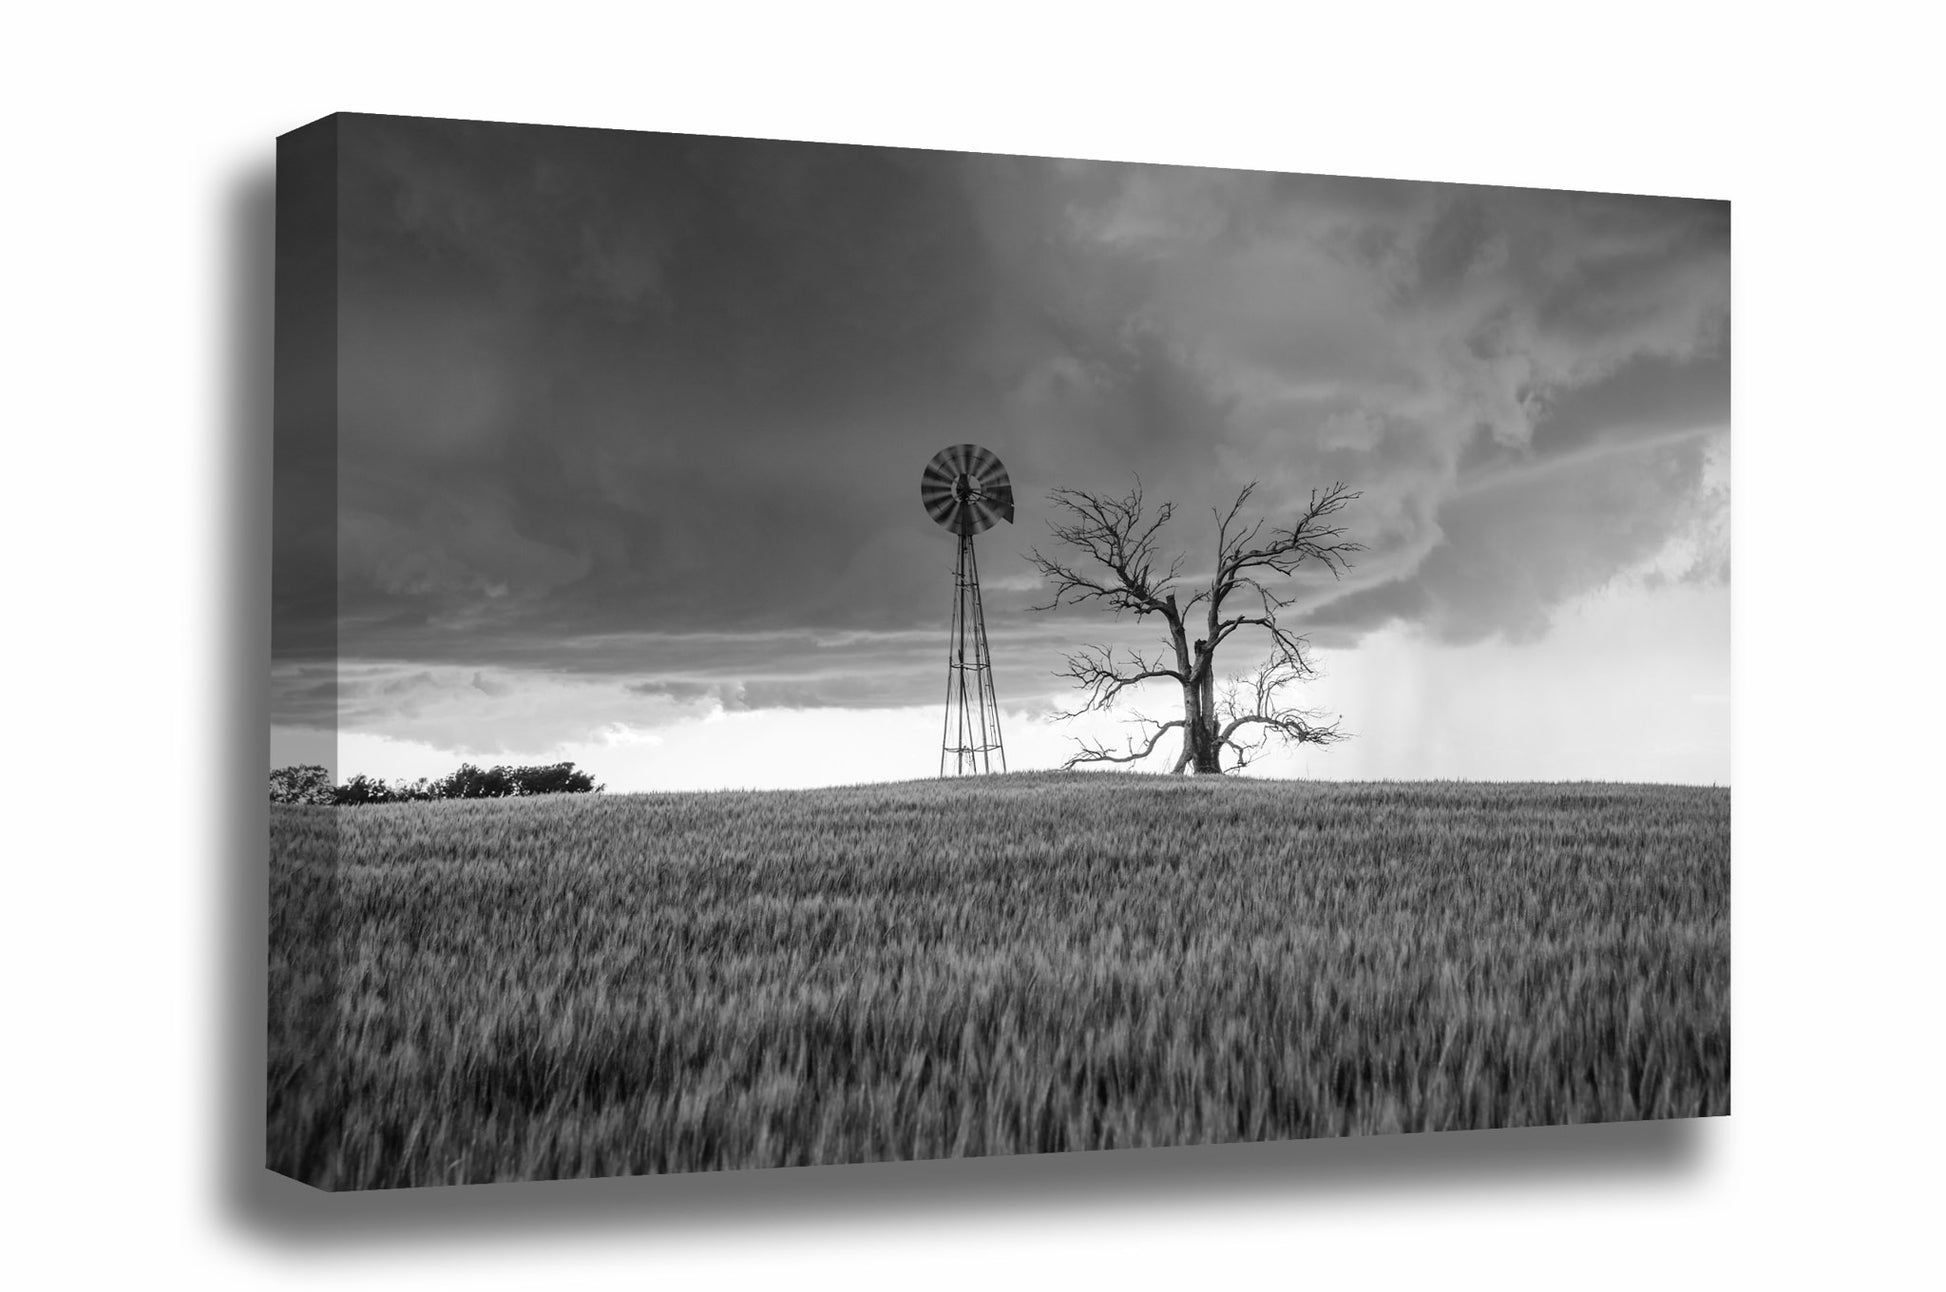 Farm canvas wall art of an old windmill and dead tree in a wheat field as a storm approaches in Oklahoma in black and white by Sean Ramsey of Southern Plains Photography.